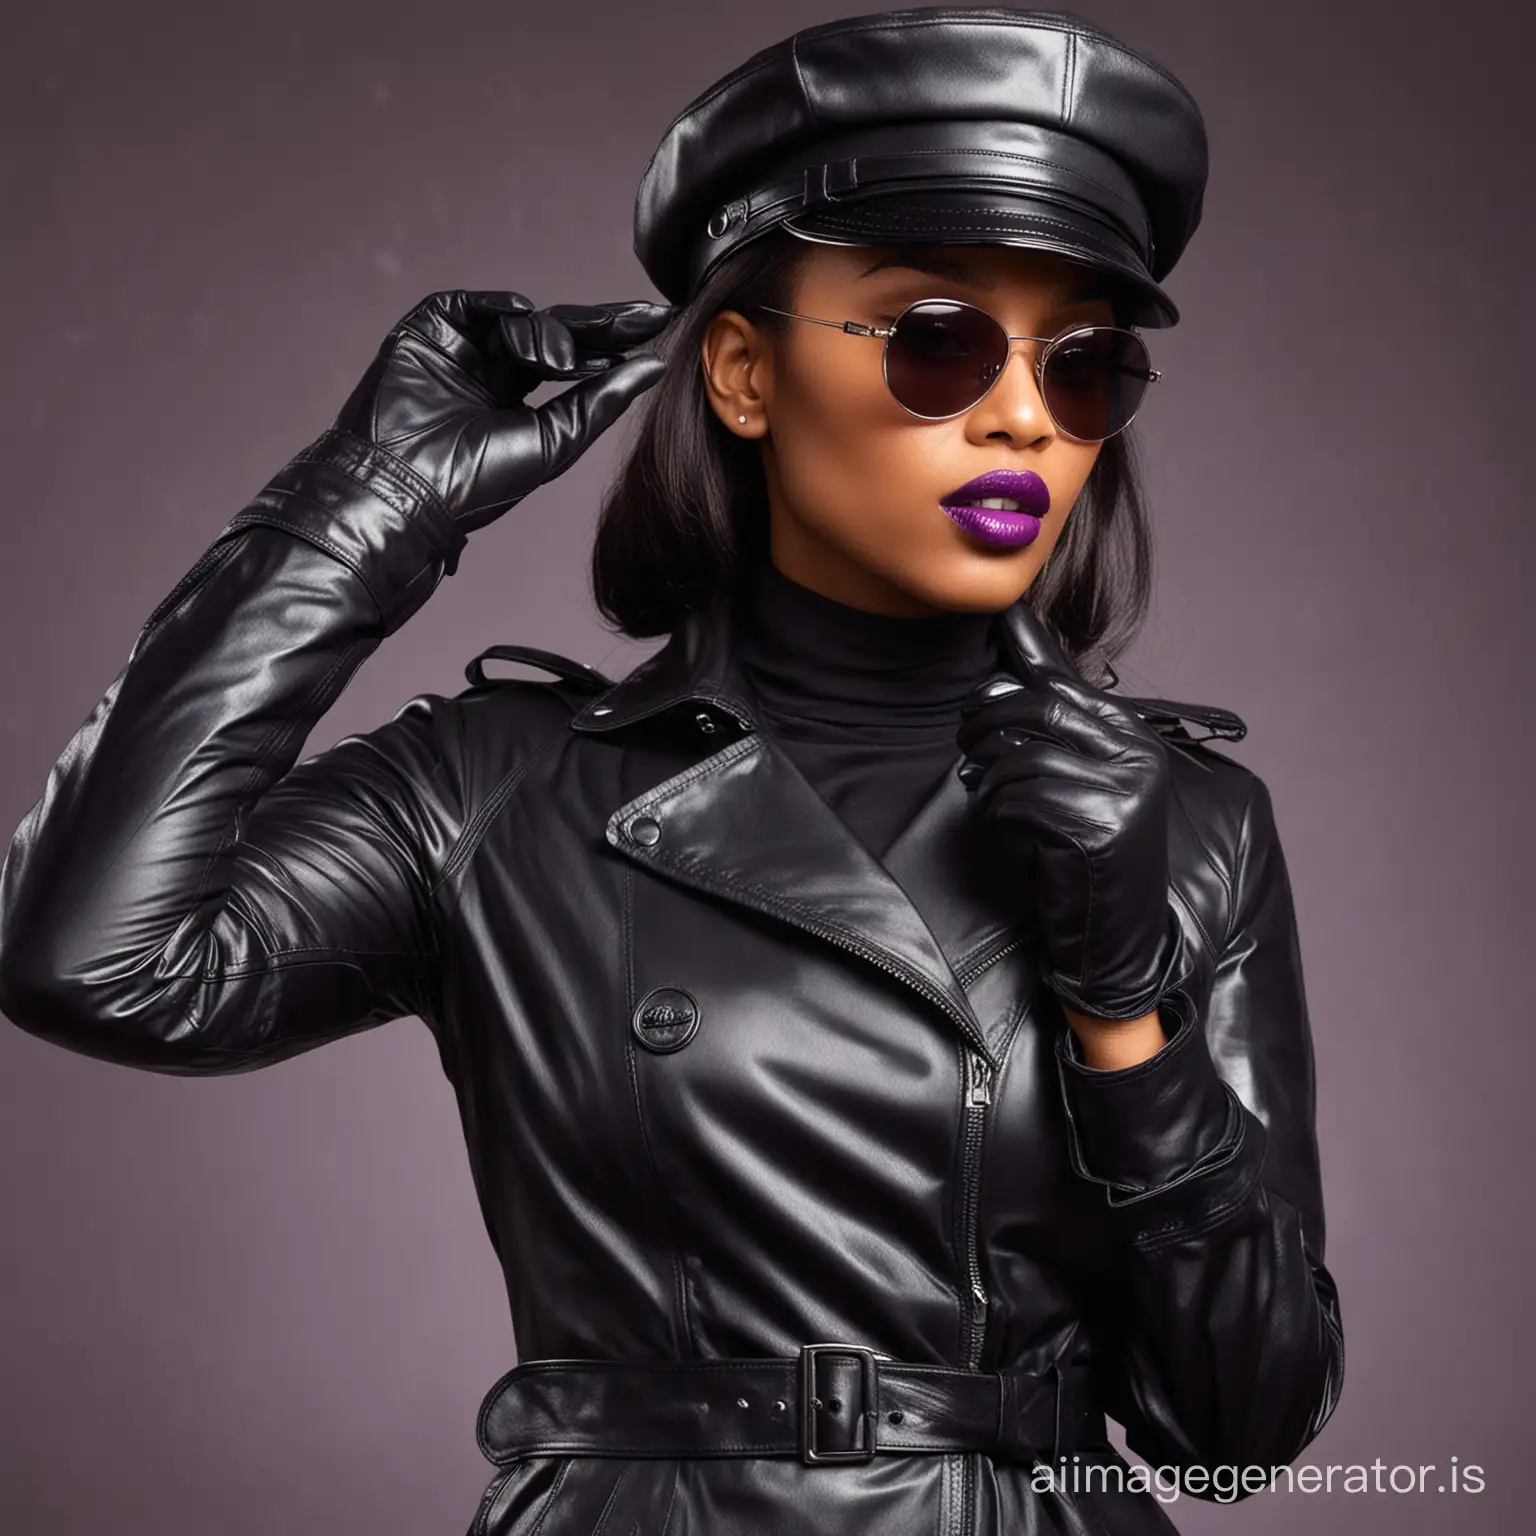 Stylish-Ebony-Woman-in-Black-Leather-Trench-Coat-and-Accessories